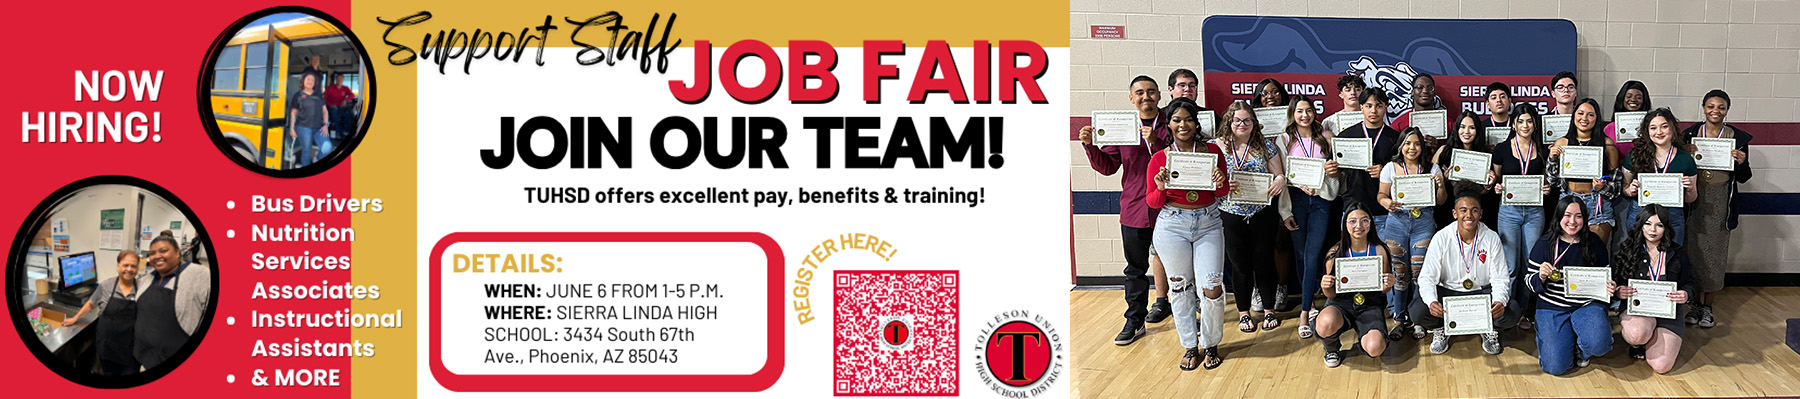 TUHSD Job Fair- we offer excellent pay, benefits, & training! Hiring bus drivers, nutrition services associates, instructional assistants & more. June 6 from 1-5 pm at Sierra Linda HS in Phoenix, AZ 85043 | Students holding certificate